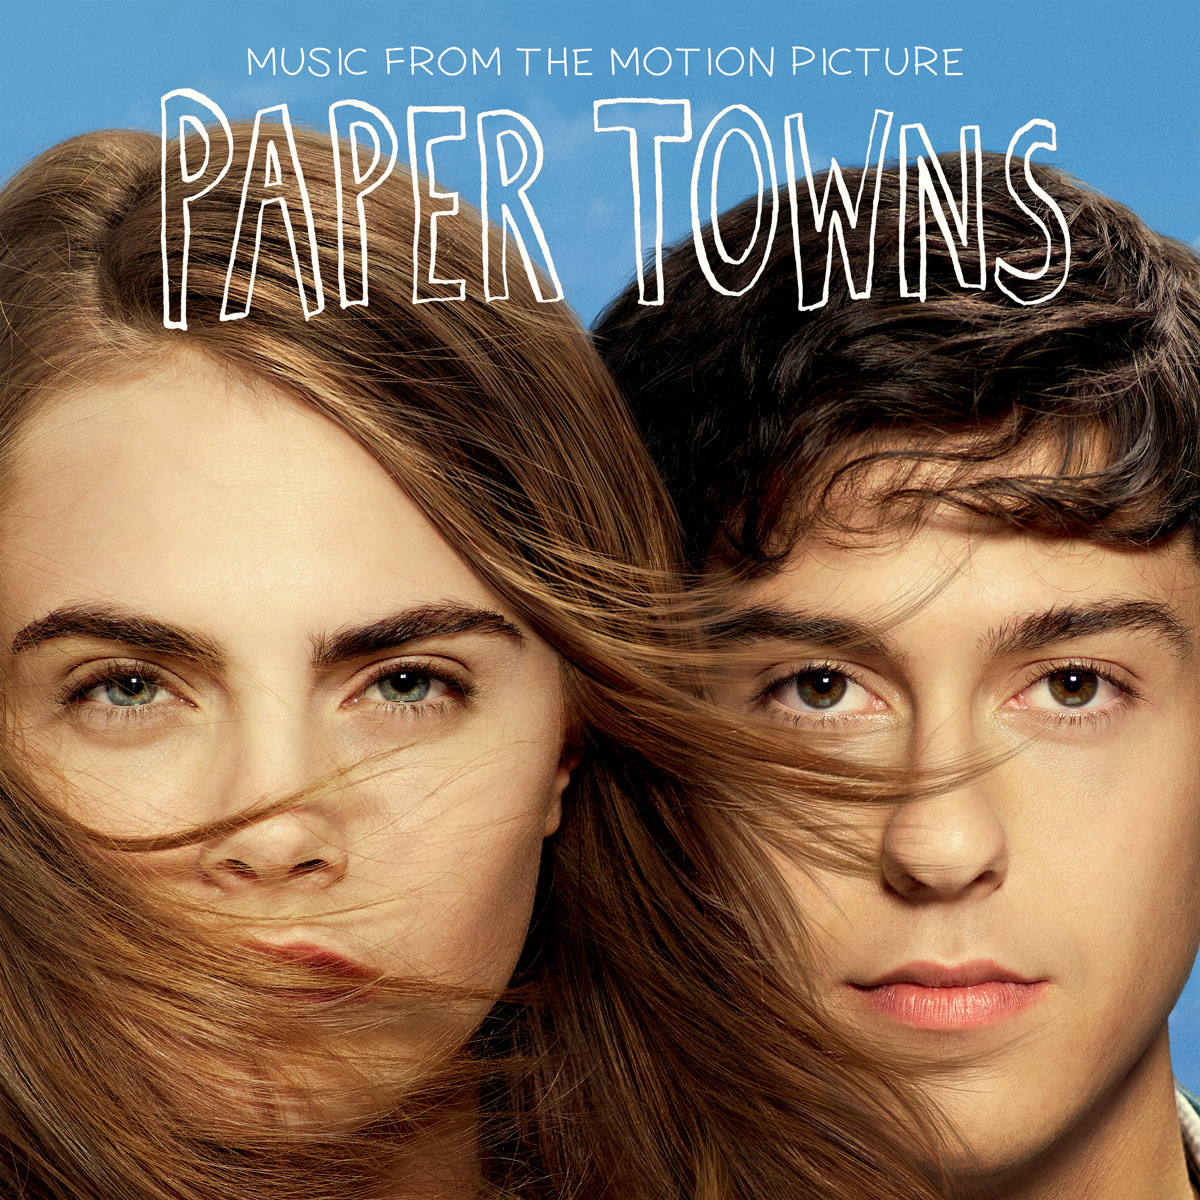 Download Paper Towns 2016 full movie hd online free - Downloads Paper Towns | Teaser | Official HD 2015